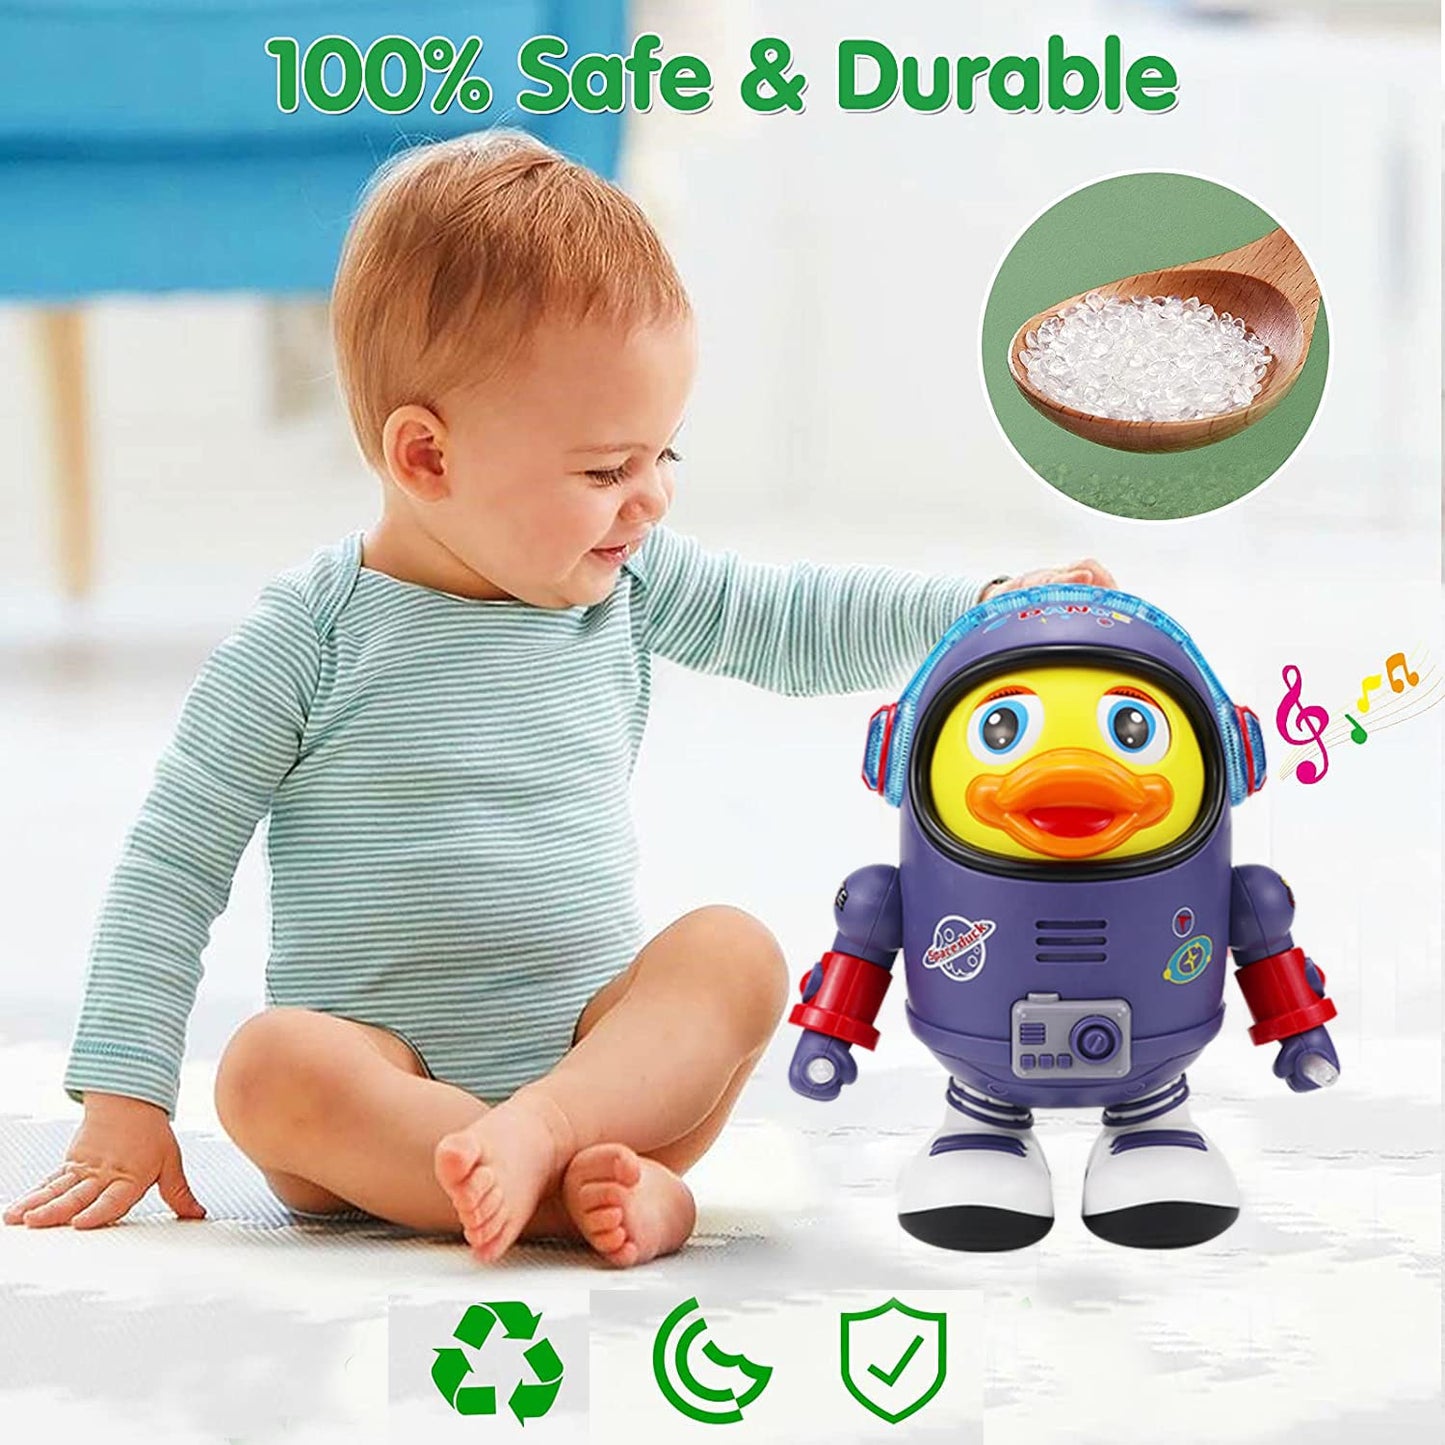 AM ANNA Baby Musical Toy,Dancing Walking Duck,Baby Toy with Music & LED Lights,Crawling Toys 6 to 12 Months Activity Center for Toddlers Learning Educational Development Toy for 1 + Year Old Girl Boy